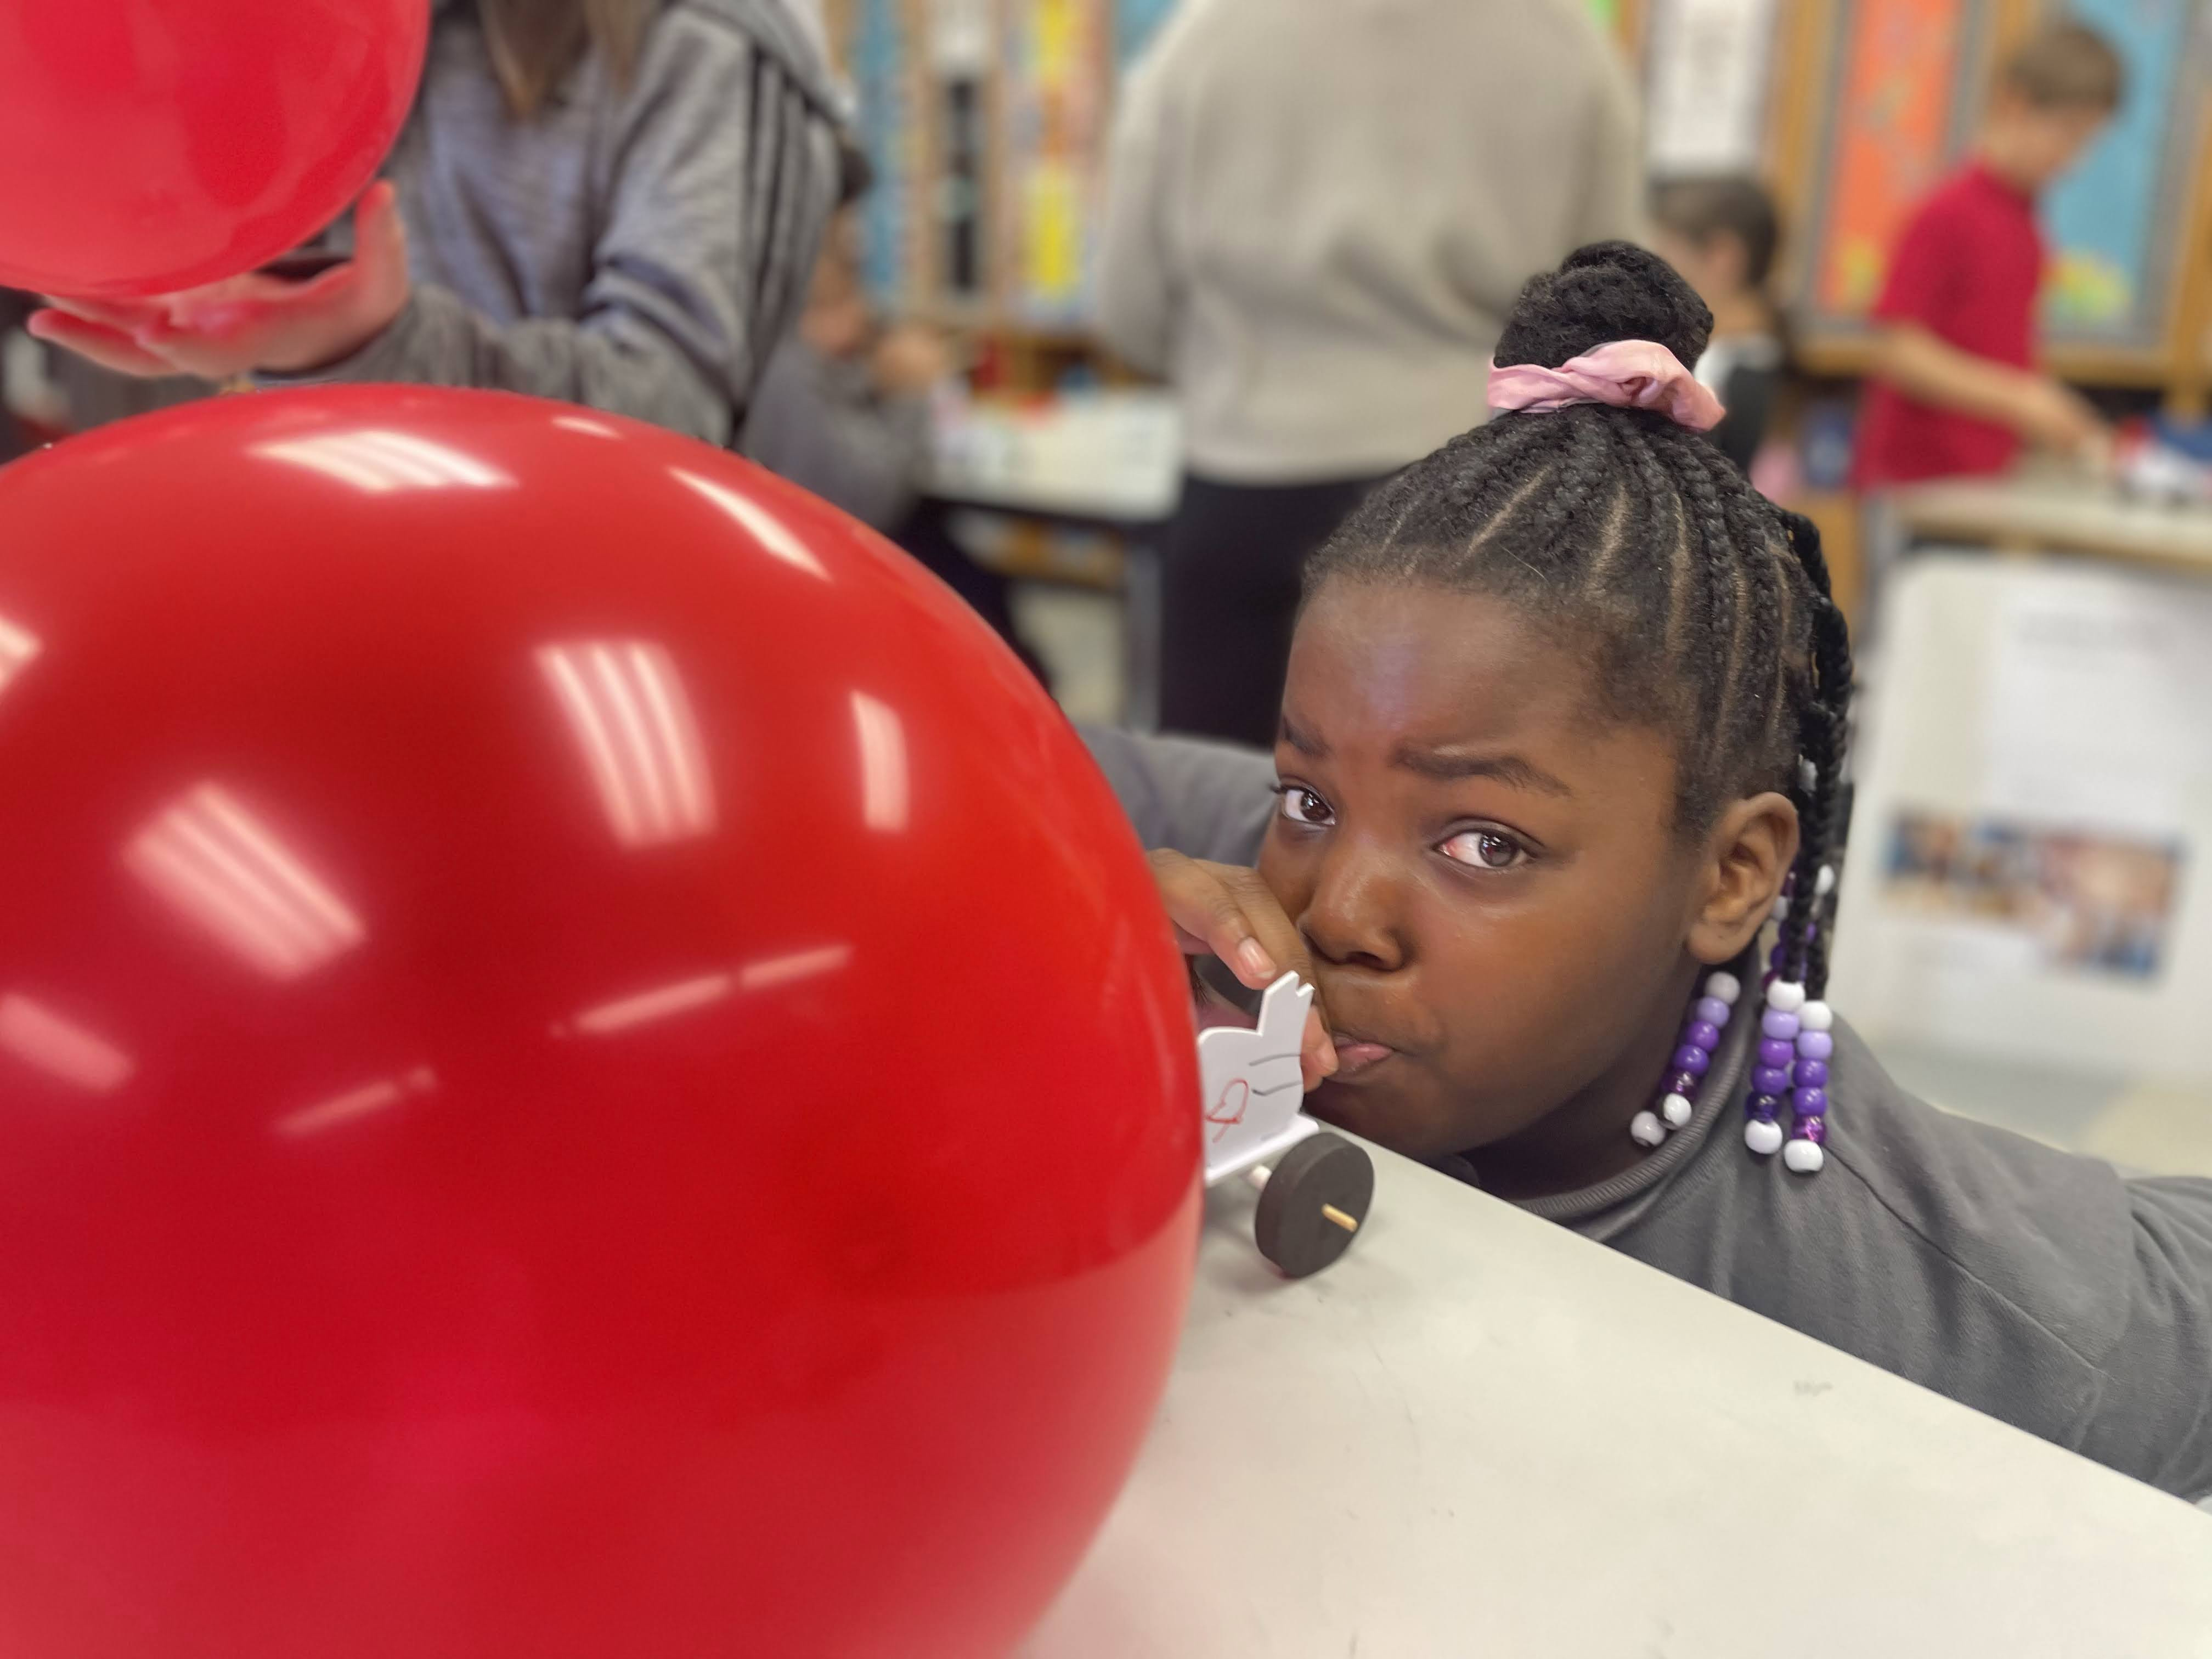 Student Blows up Balloon for a STEM Air Powered Car Project